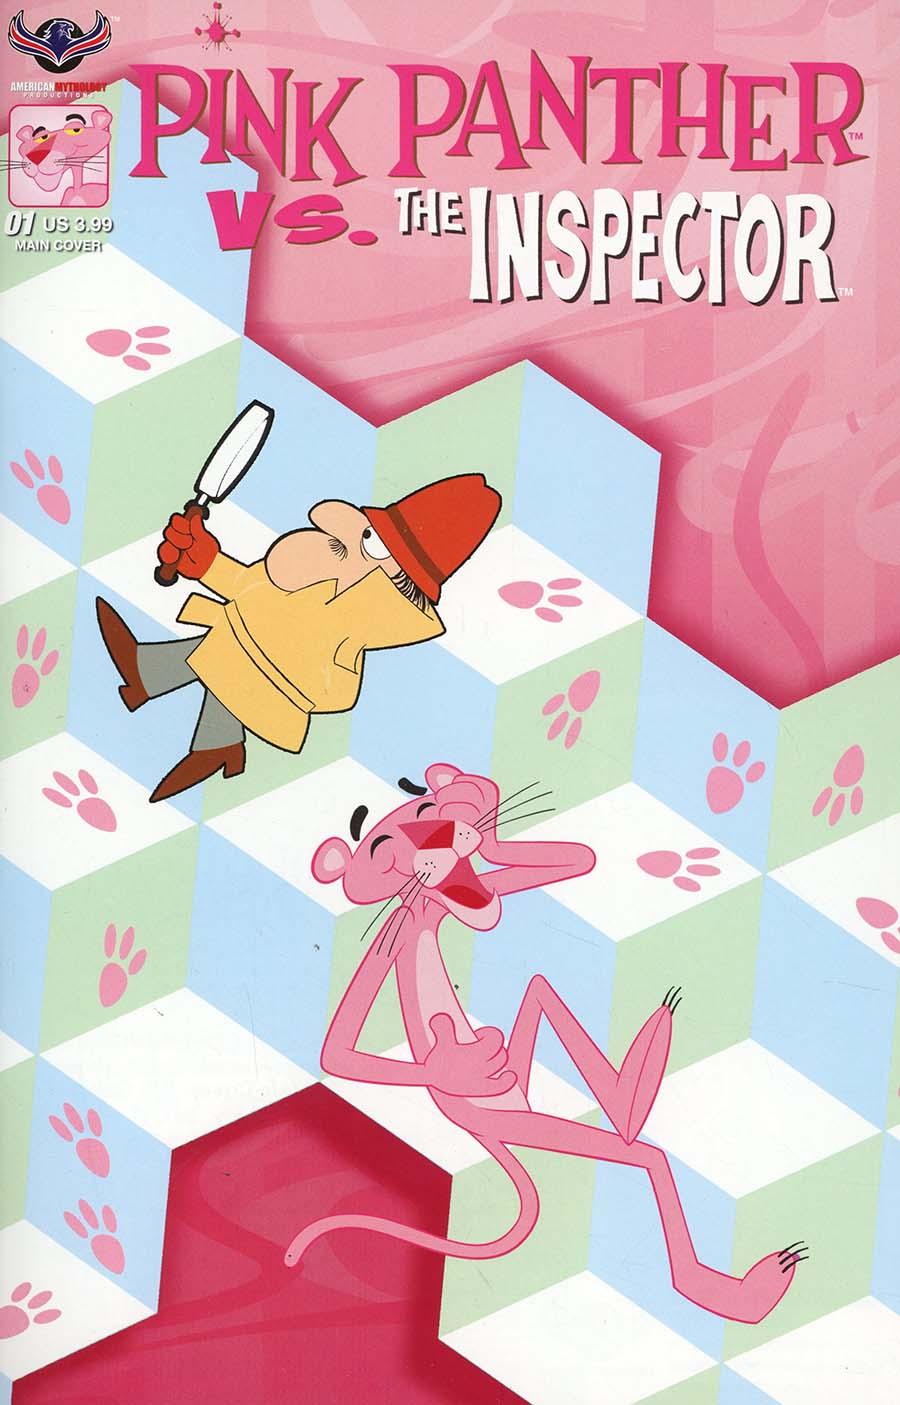 Pink Panther vs The Inspector Vol. 1 #1